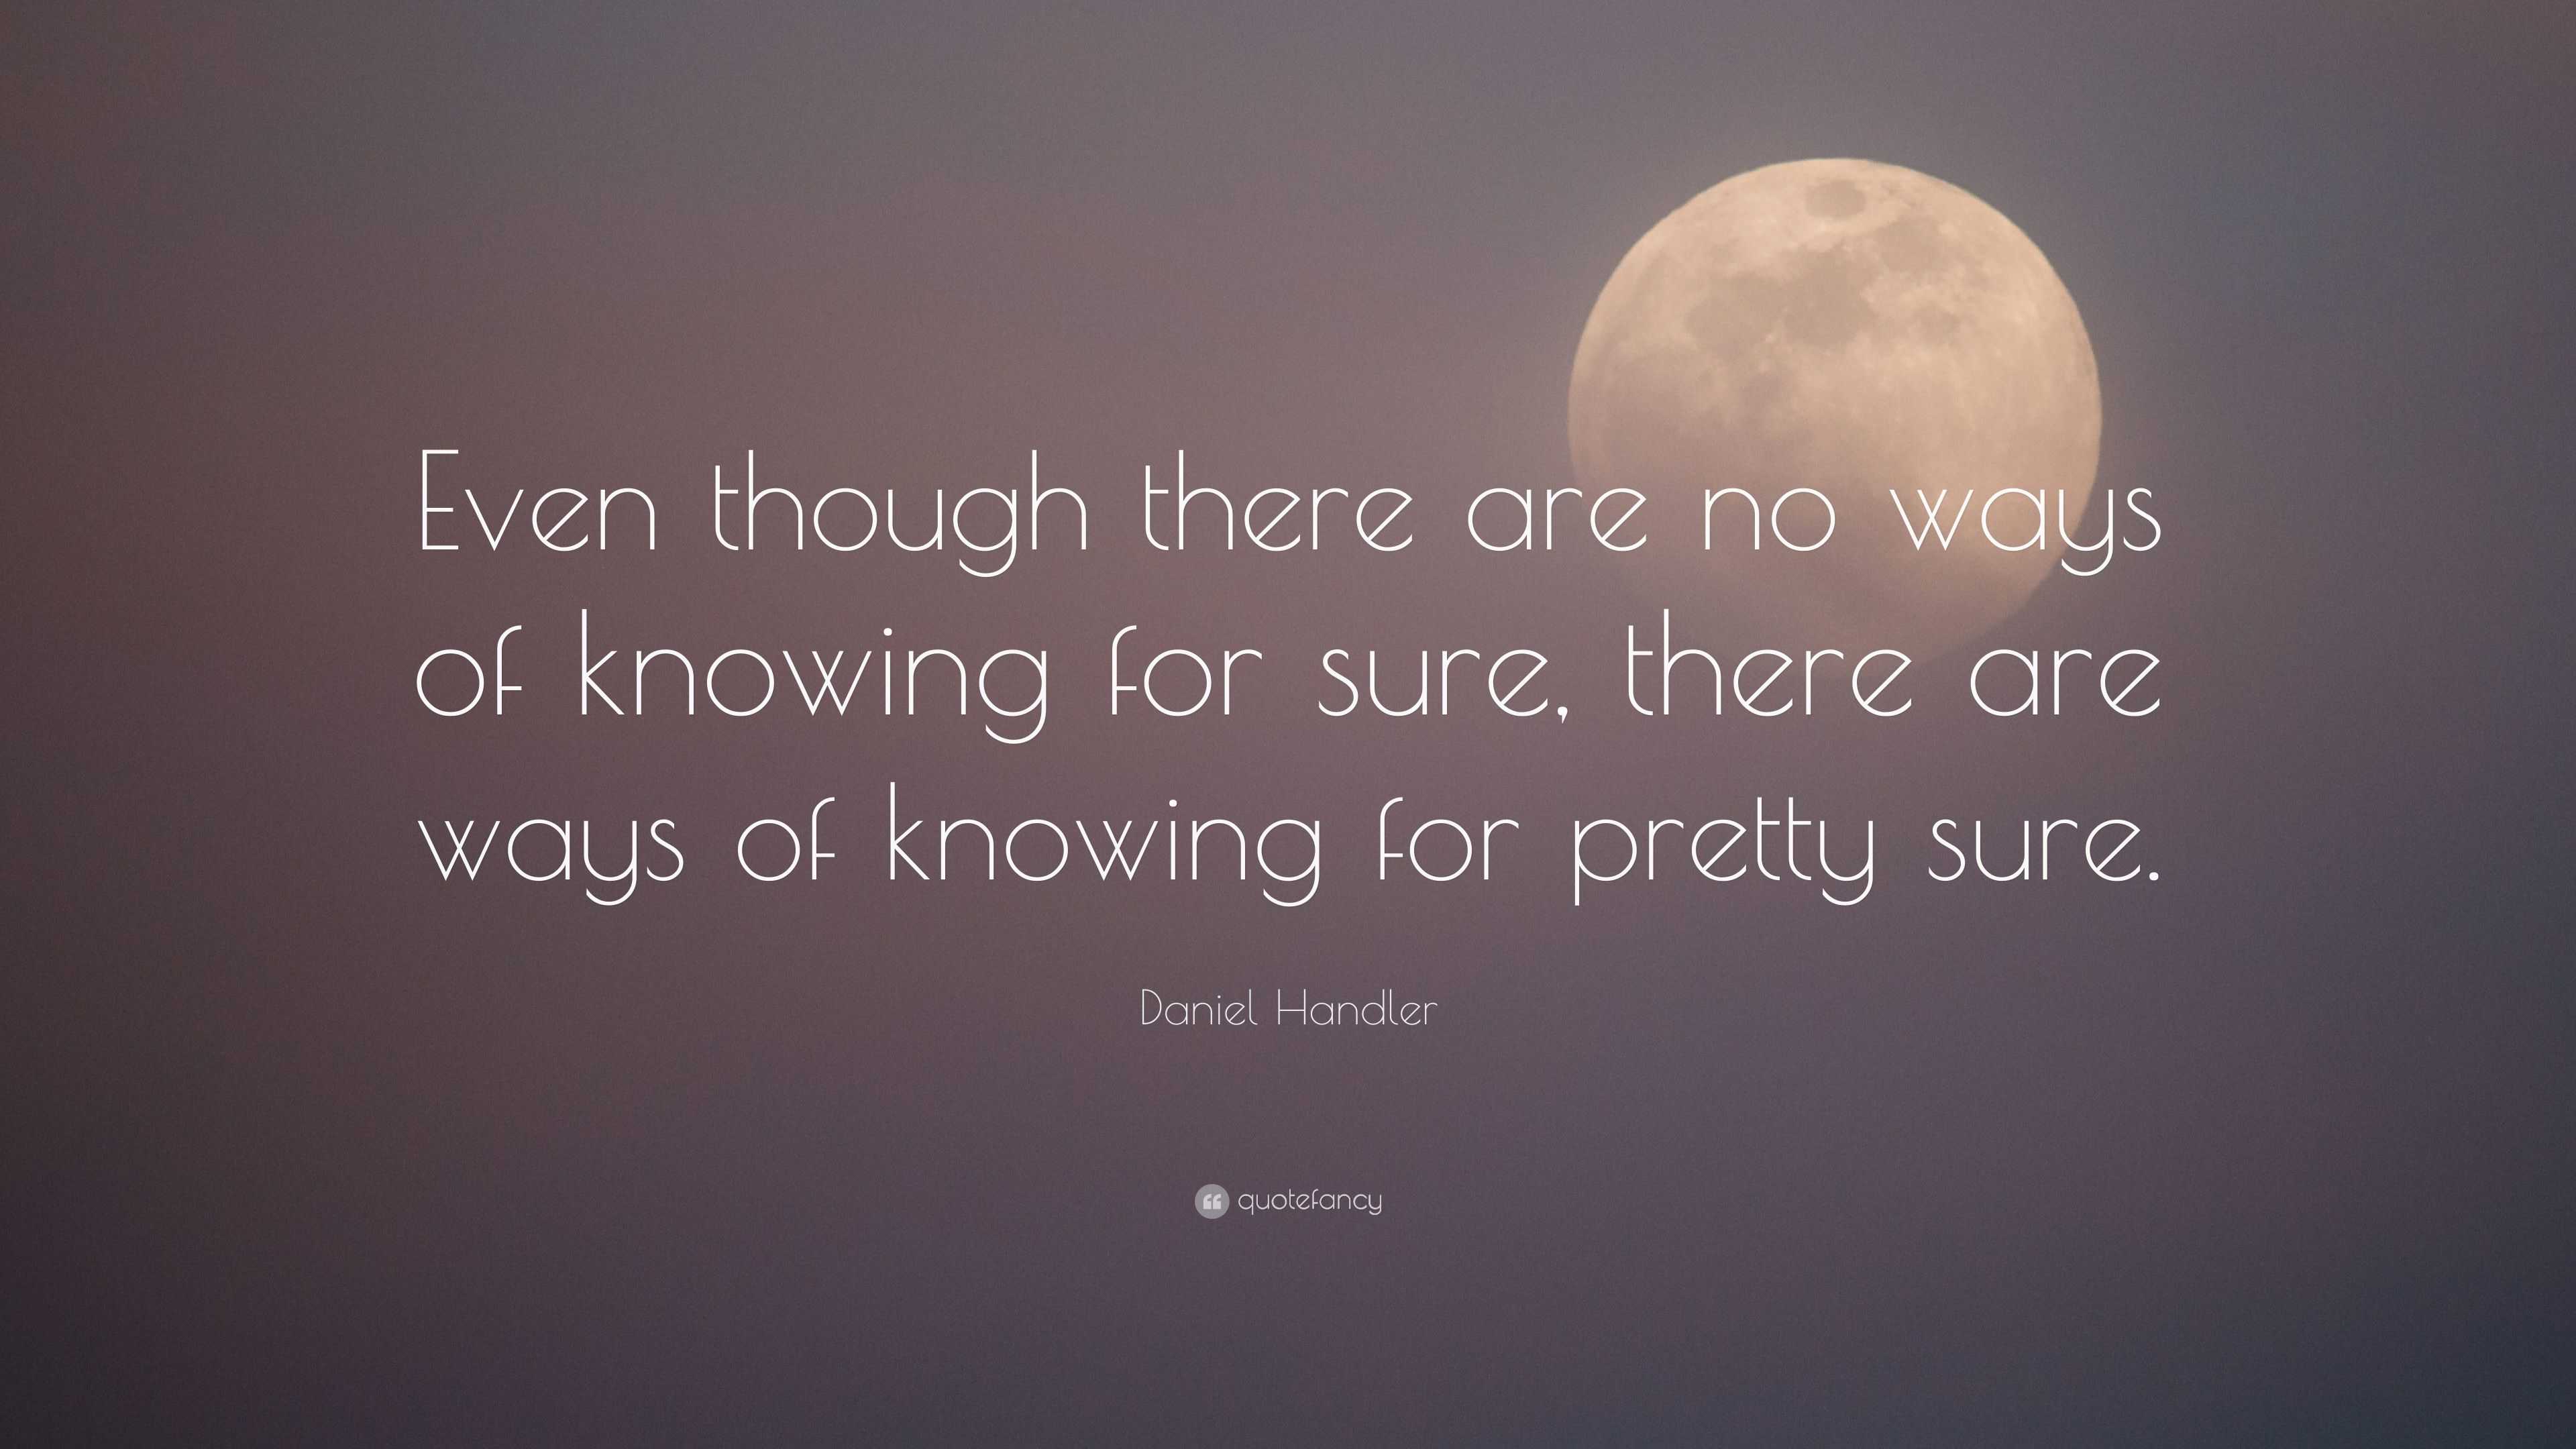 Daniel Handler Quote: “Even though there are no ways of knowing for ...